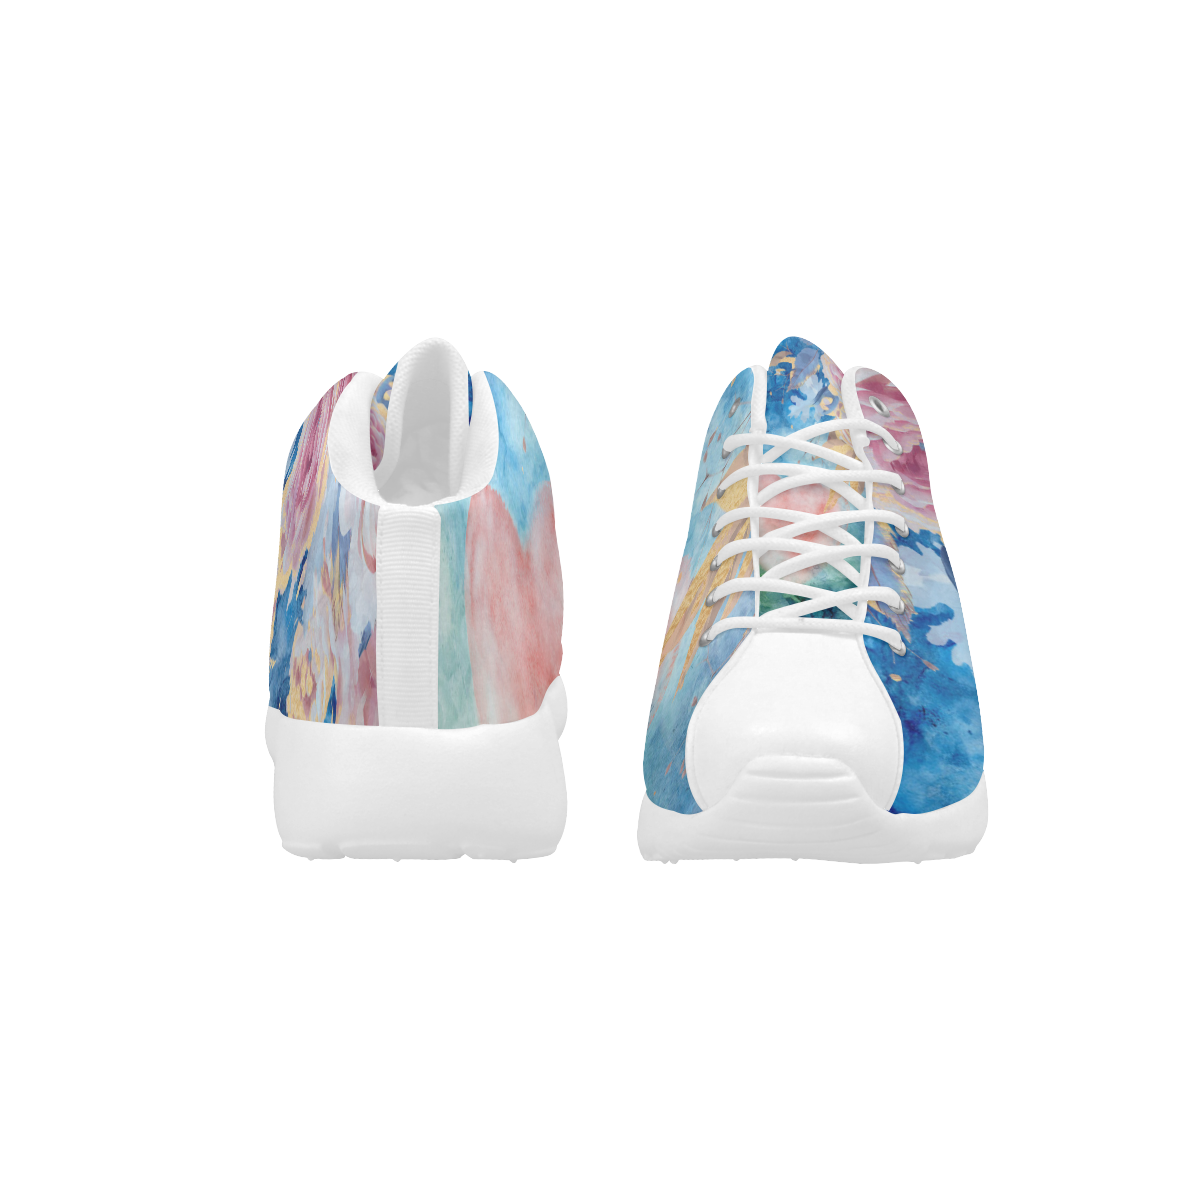 Heart and flowers - Pink and Blue Women's Basketball Training Shoes/Large Size (Model 47502)